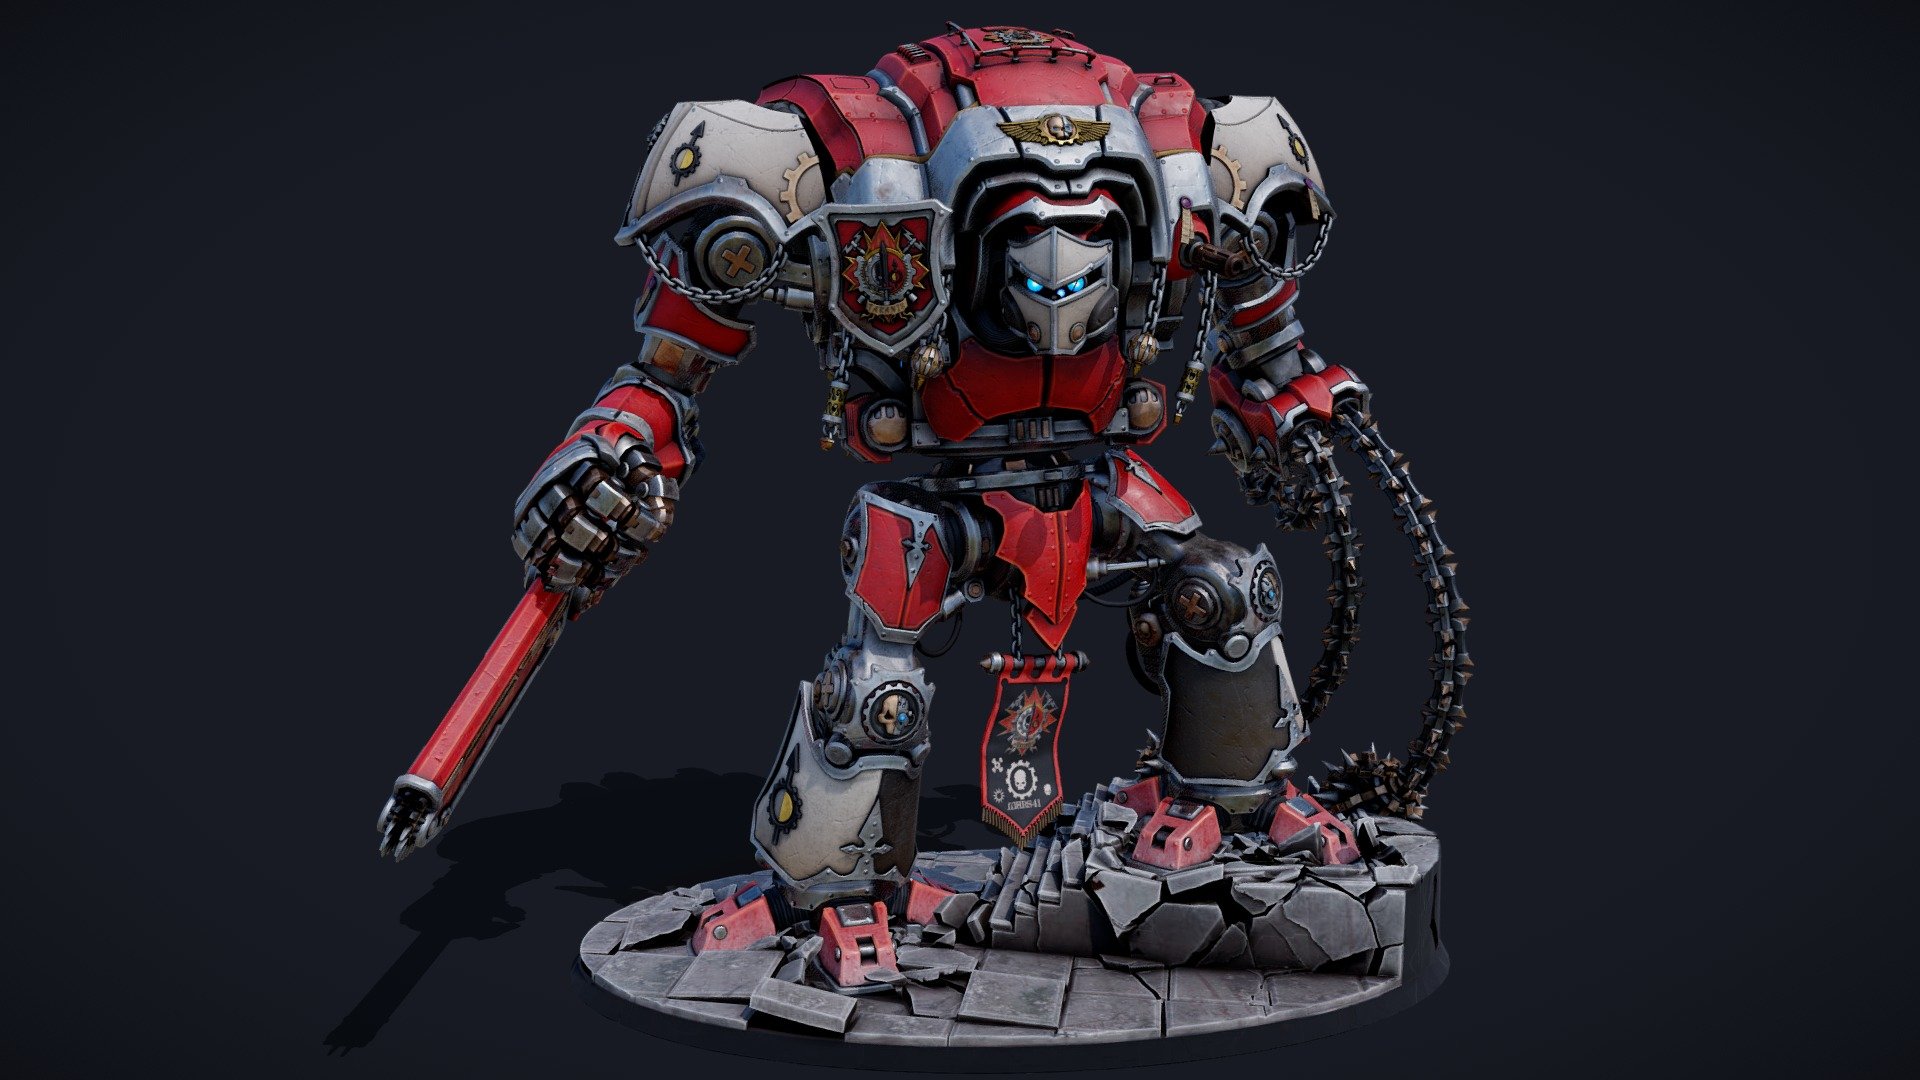 Here's the result of a project i've been working on over the last few months. the model is a re-interpretation of an imperial knight gallant from warhammer 40k. the main model was modelled and rigged in blender and textured in substance painter. The base was made using destruction simulations in Houndini out of a mesh made in blender. 
You can check out this video i made to breakdown part of the process and show some renders: https://youtu.be/yO2ZXmi9ick
artstation post about this project:     https://www.artstation.com/artwork/qQXm4N
UPDATE: the file is finally available for purchase! STL and 3D print-ready files are included with an option for small printers. please notify me if you have any issues with the files, i will be updating those with your feedback / if it doesnt work as well on specific printers. Feel free to contact me for commissions on similar projects, i can easily swap out the logos and customise this model so it fits your faction better ^^
 - imperial knight: house taranis - Buy Royalty Free 3D model by guillaume bolis (@guillaume.bolis) 3d model